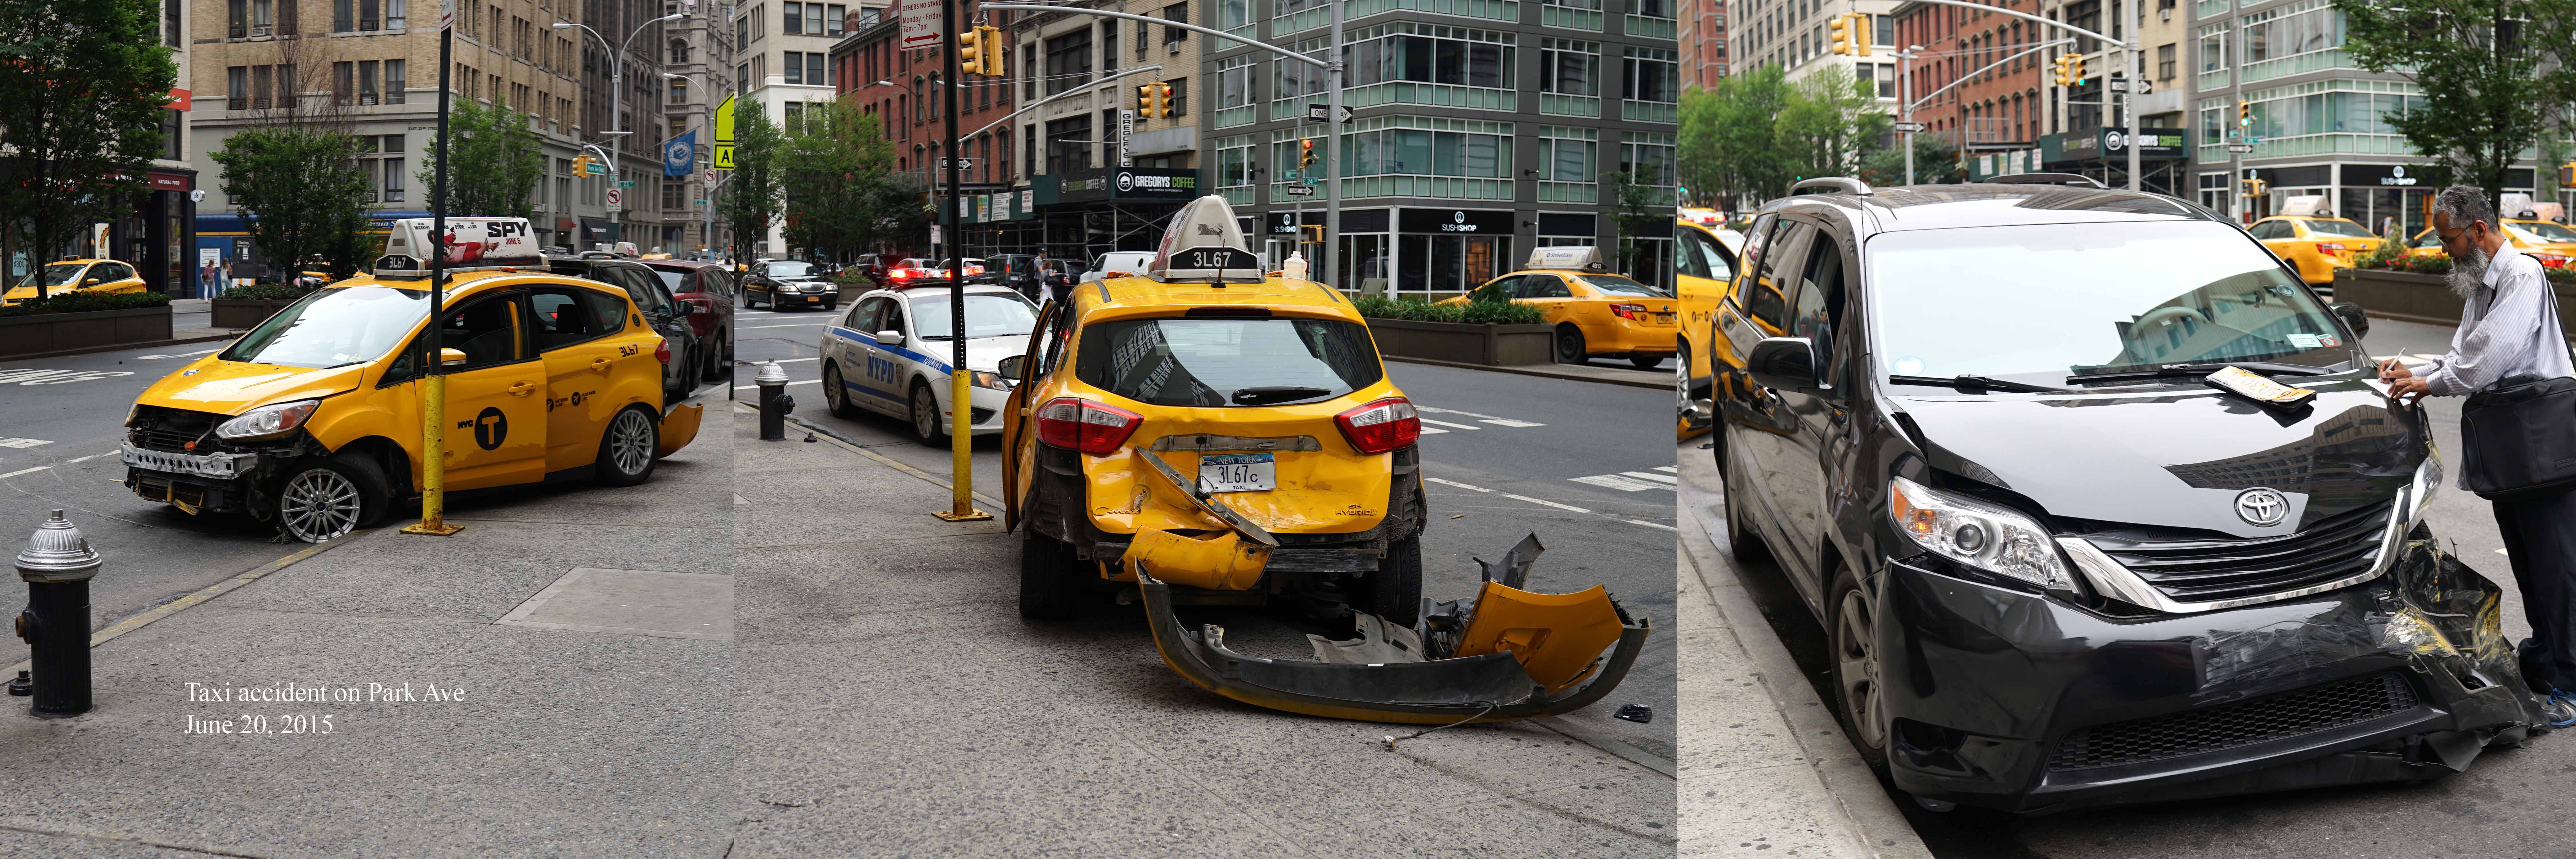 Taxi accident on Park Ave 6-20-2015